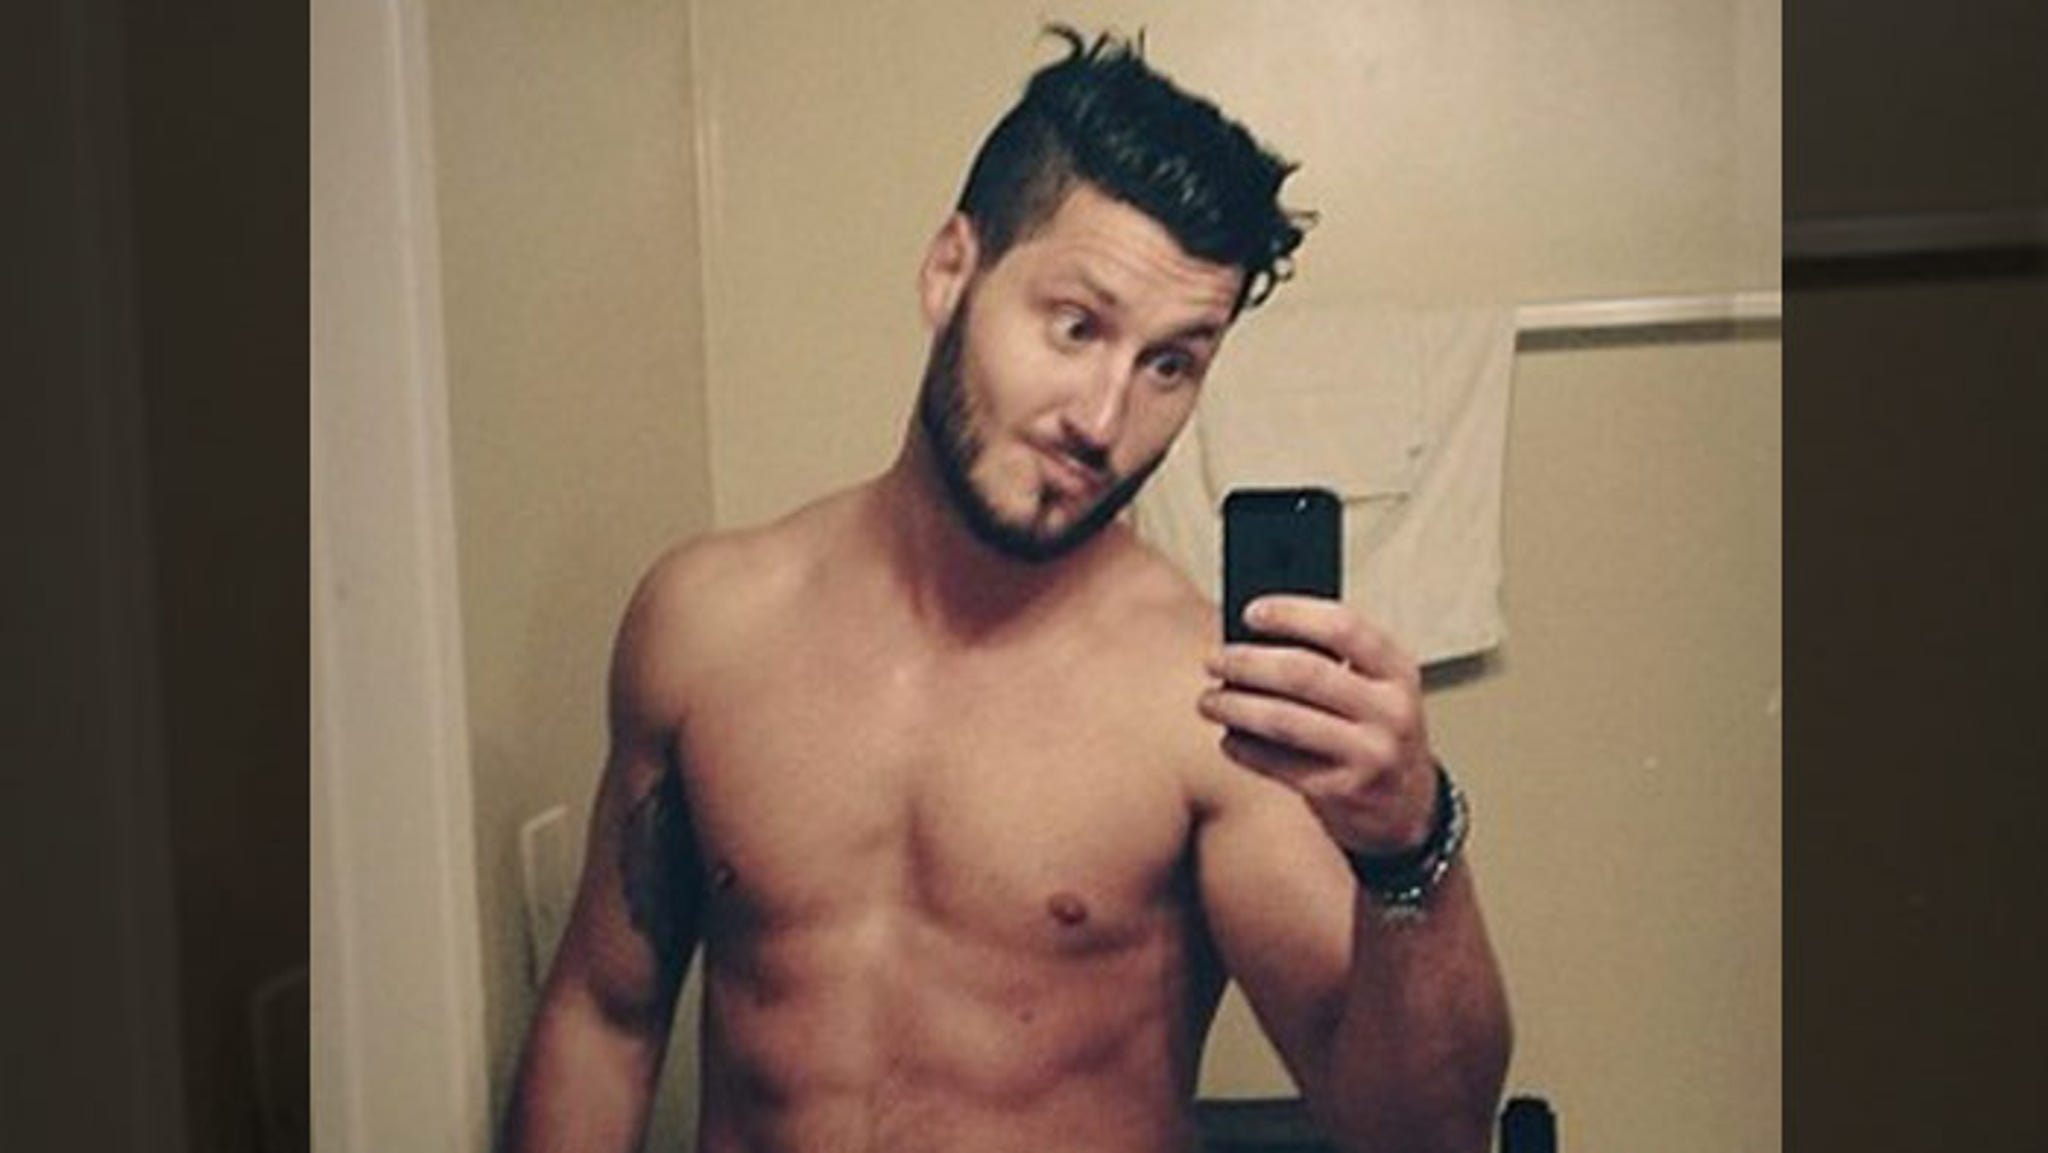 18 Sexy Shirtless Shots of DWTS Pro Val Chmerkovskiy For 